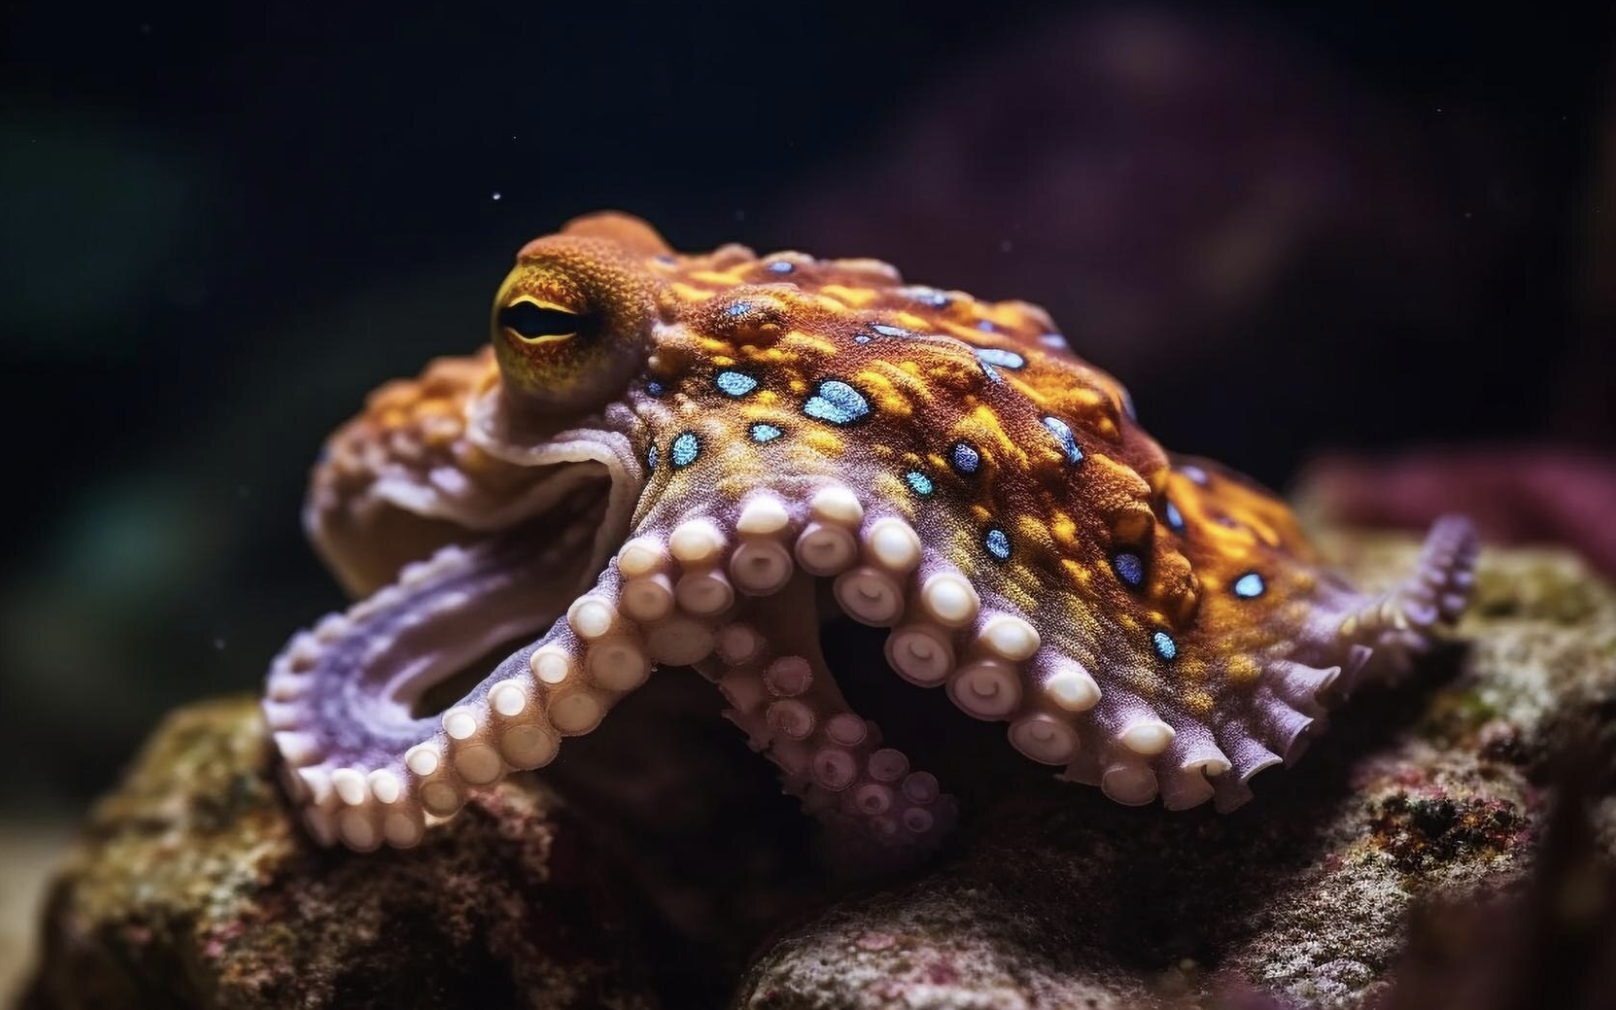 The 8 Smartest Animals in the World